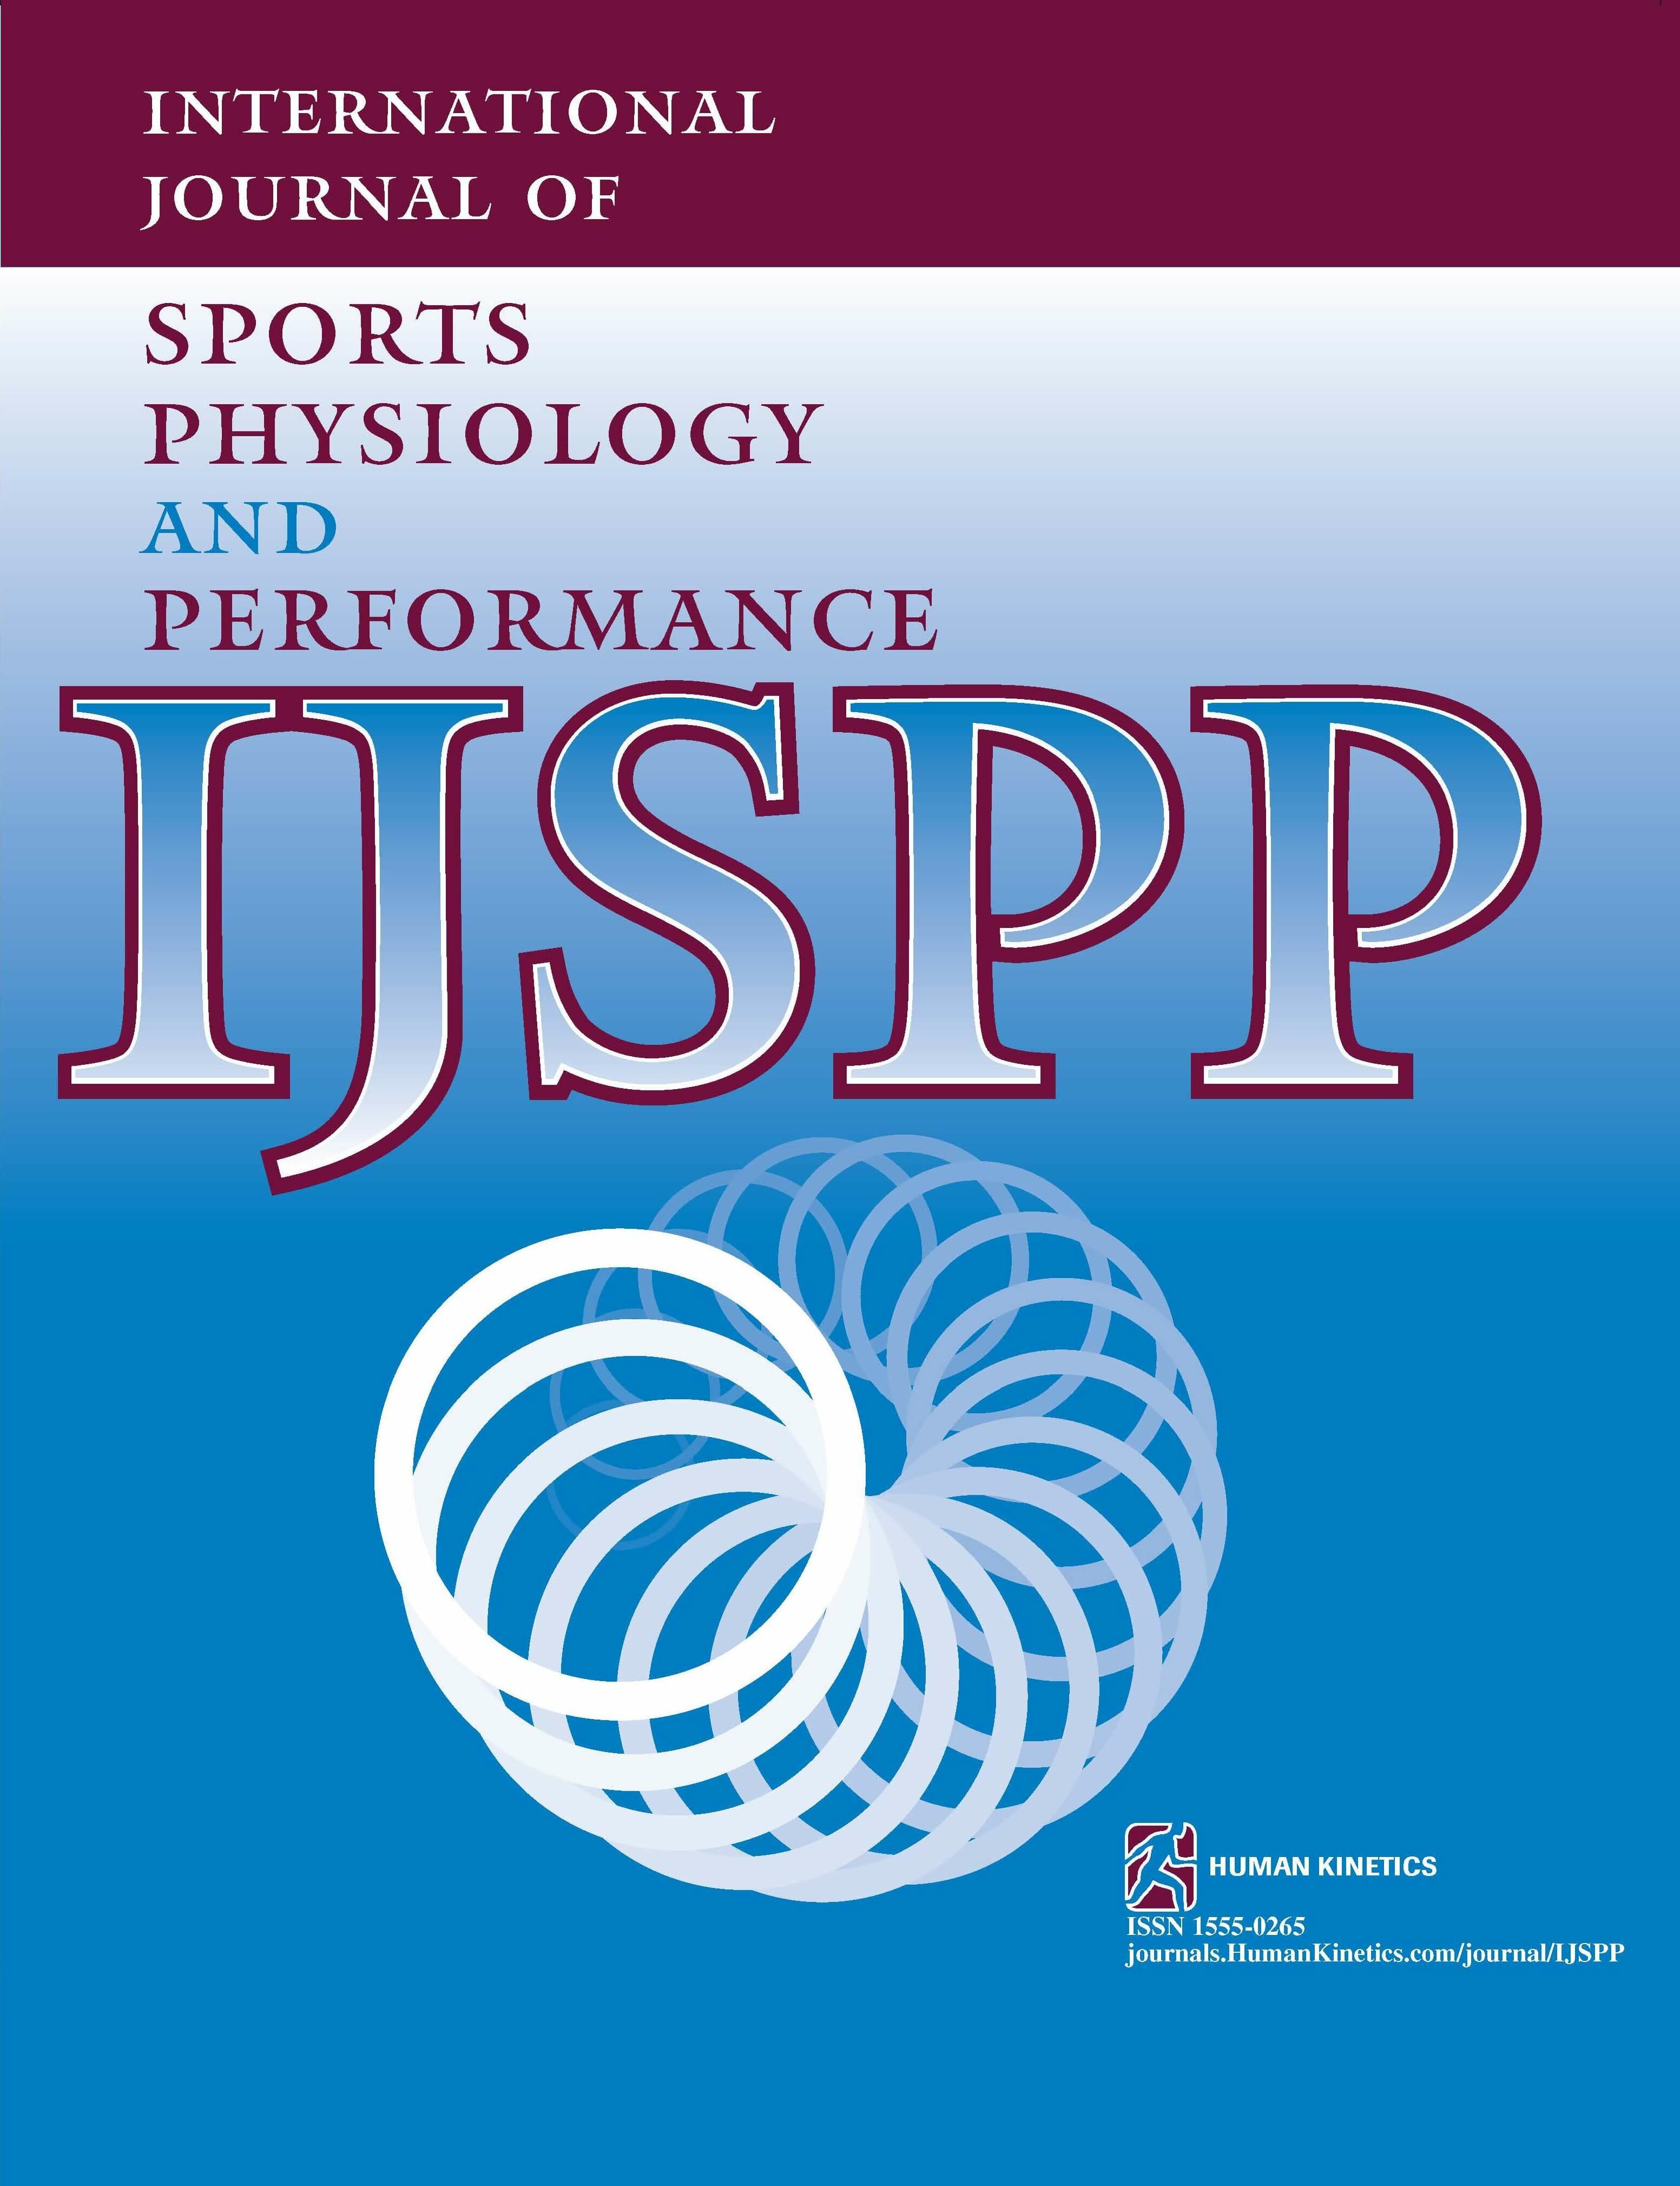 Assessing the Use of Heart-Rate Monitoring for Competitive Swimmers